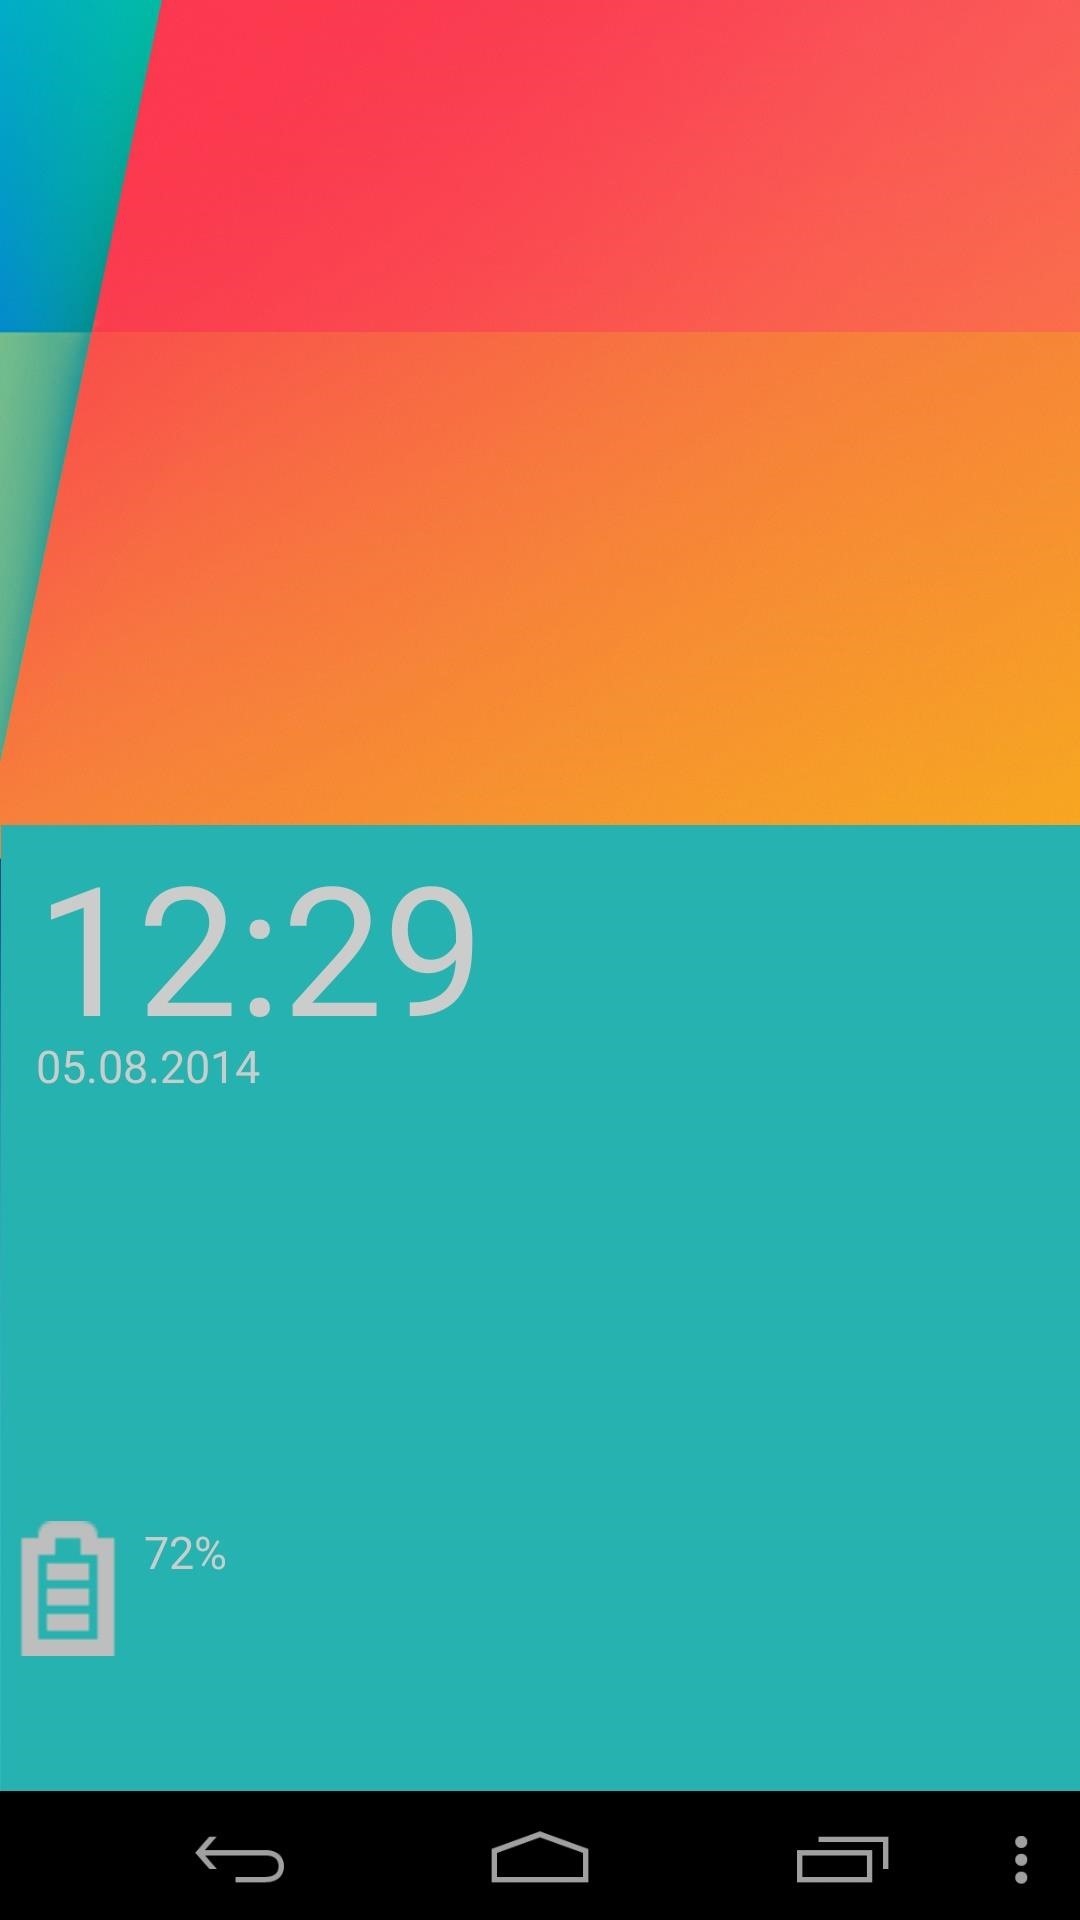 How to Get the OnePlus One Lock Screen on Your Nexus 5 or Other Android Phone